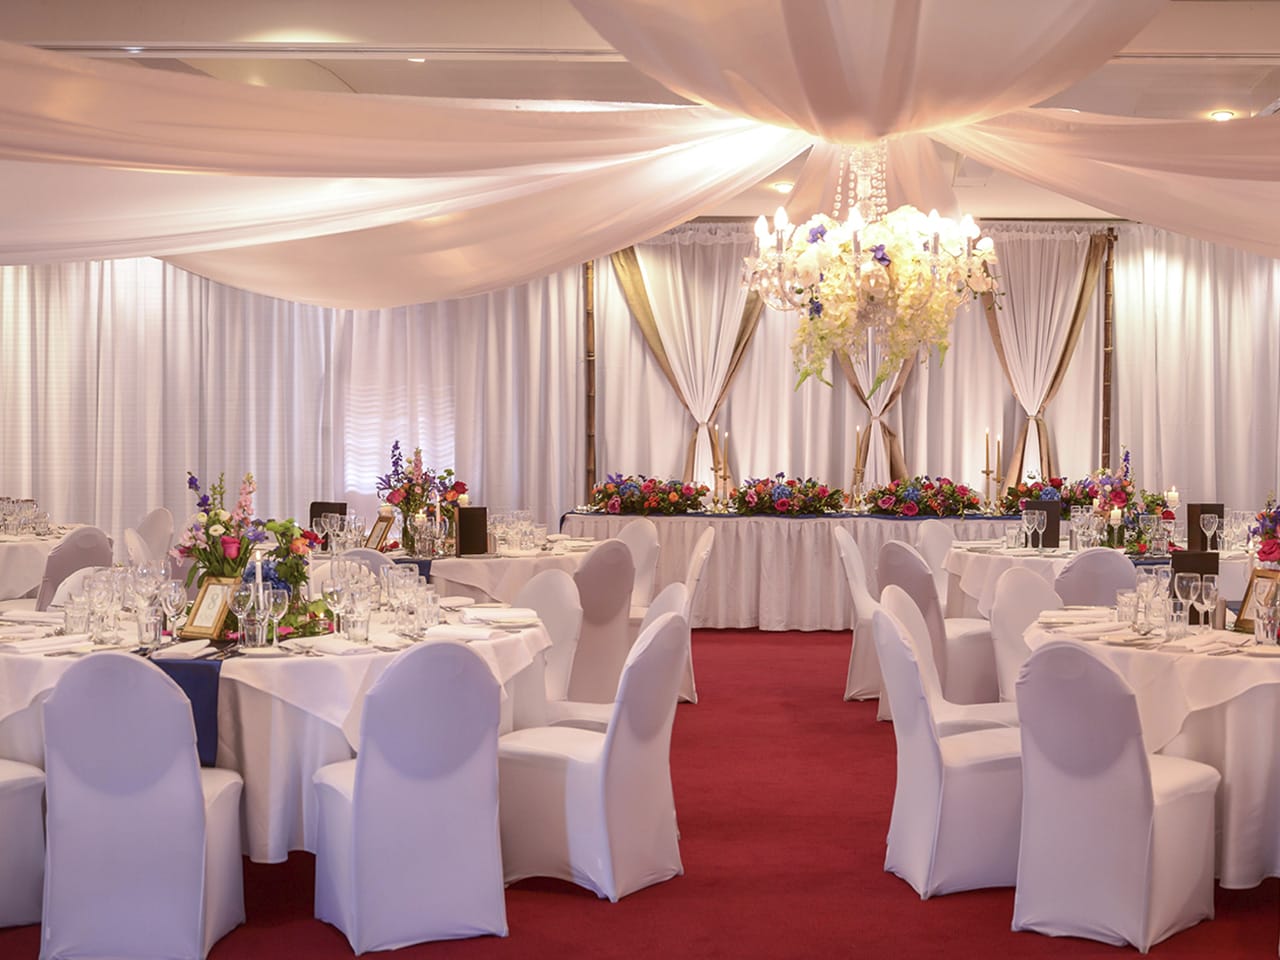 Tables And Chairs In Banquet Style And A Special Long Table With Flower Centerpieces, Chandelier And Ceiling Drapping